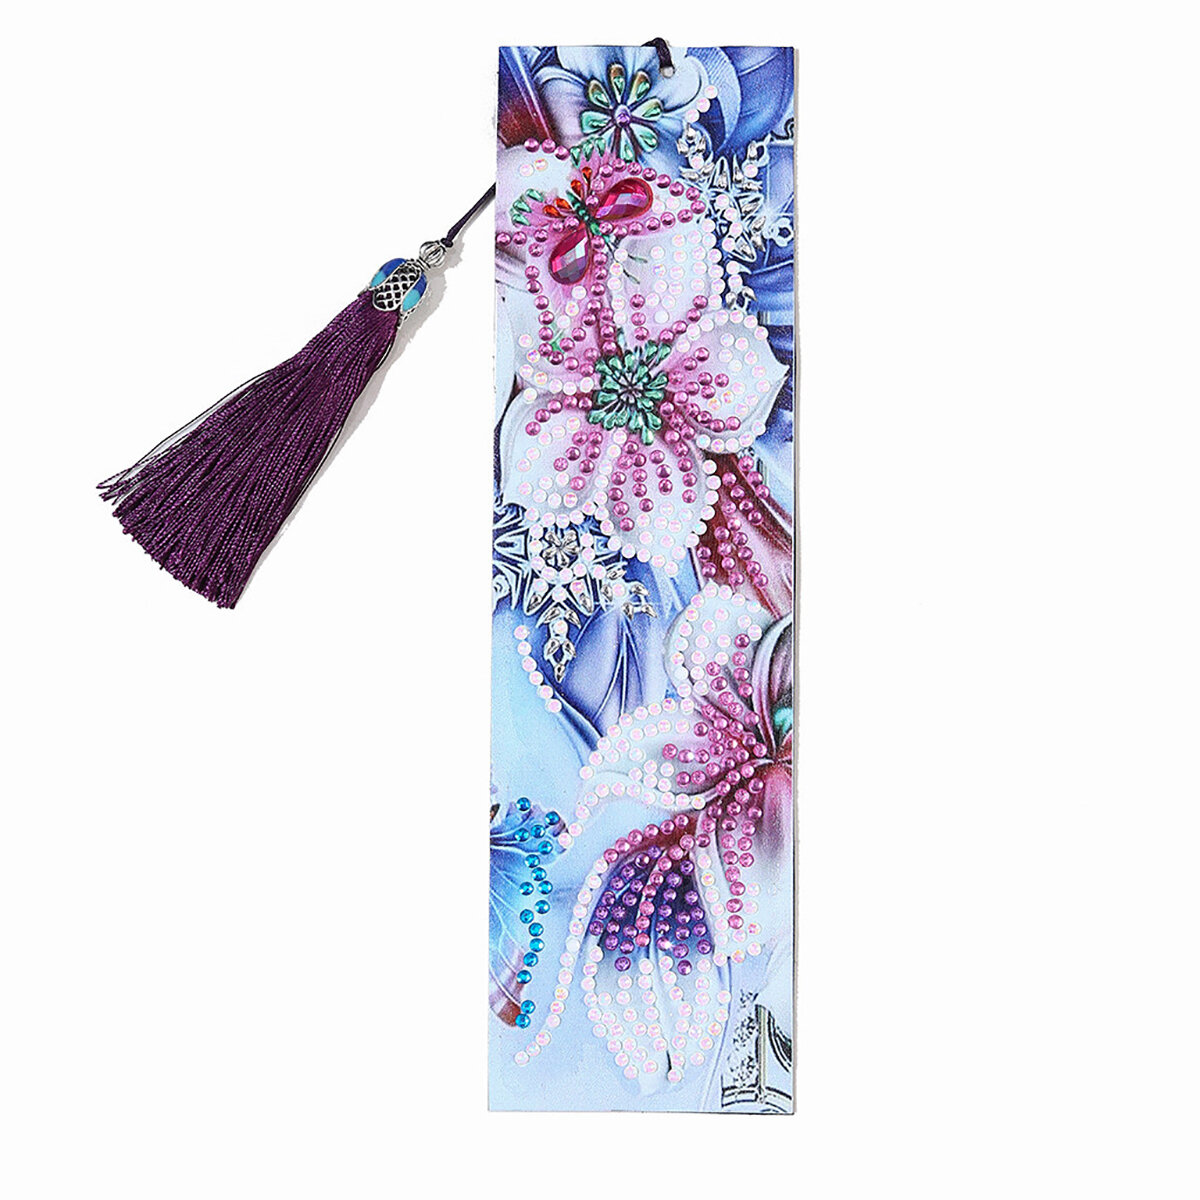 DIY Beaded Bookmarks 5D Diamond Painting Peacock Butterfly Flower Art Craft Embroidery Stitch Kit Ha